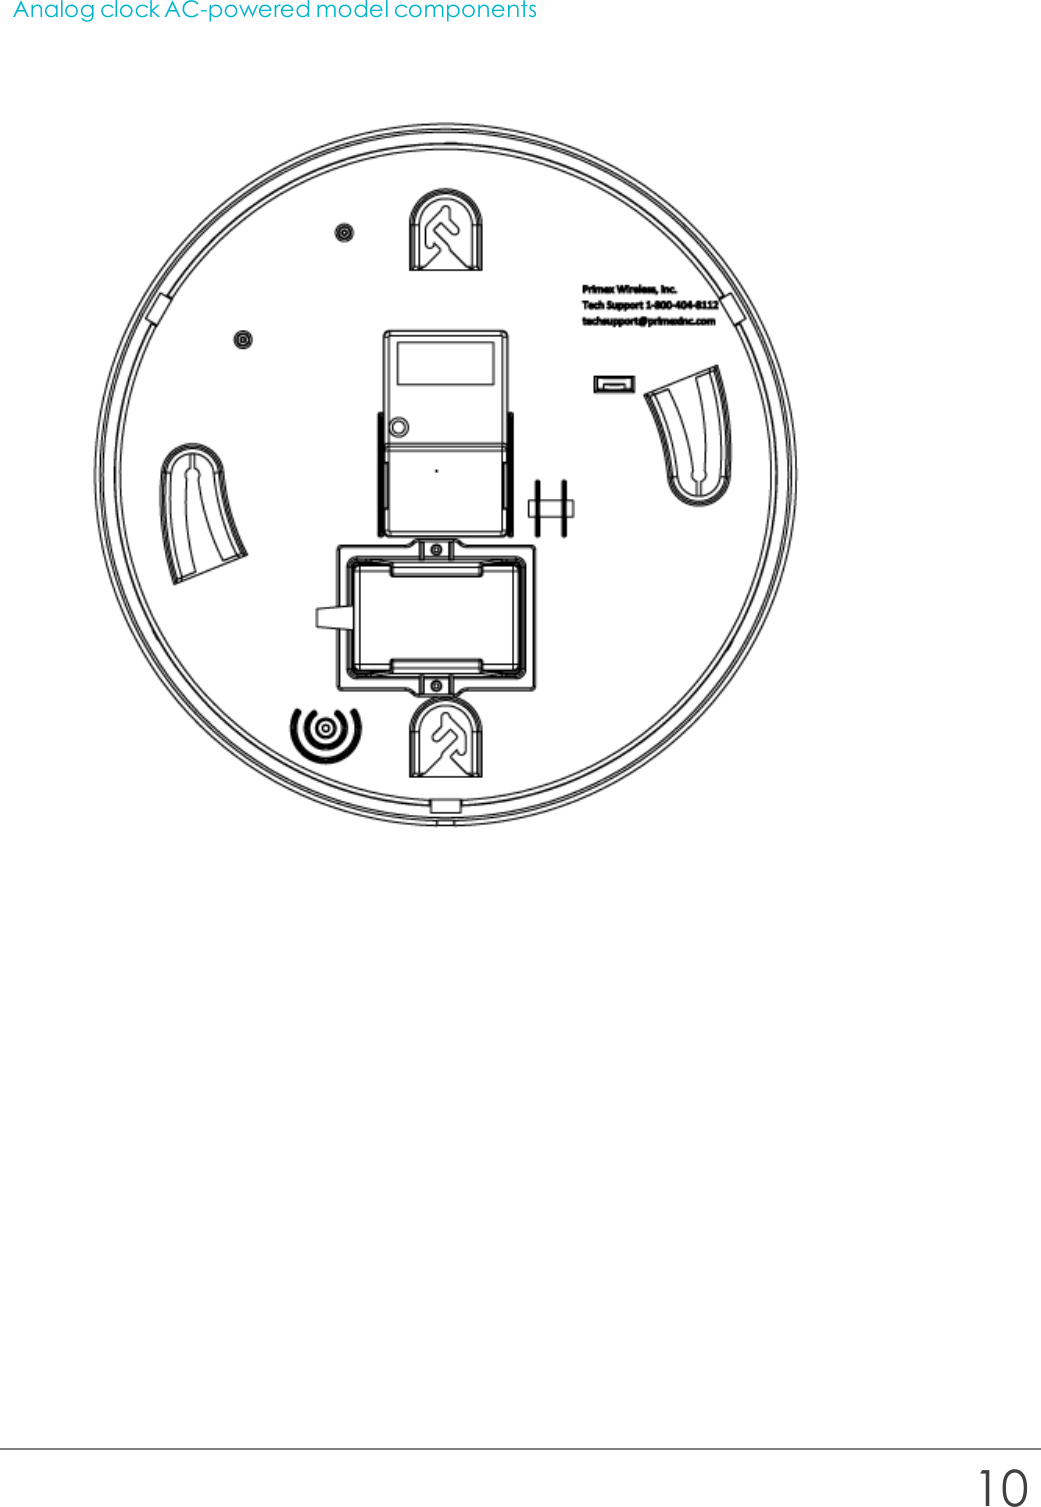 Analog clock AC-powered model components10